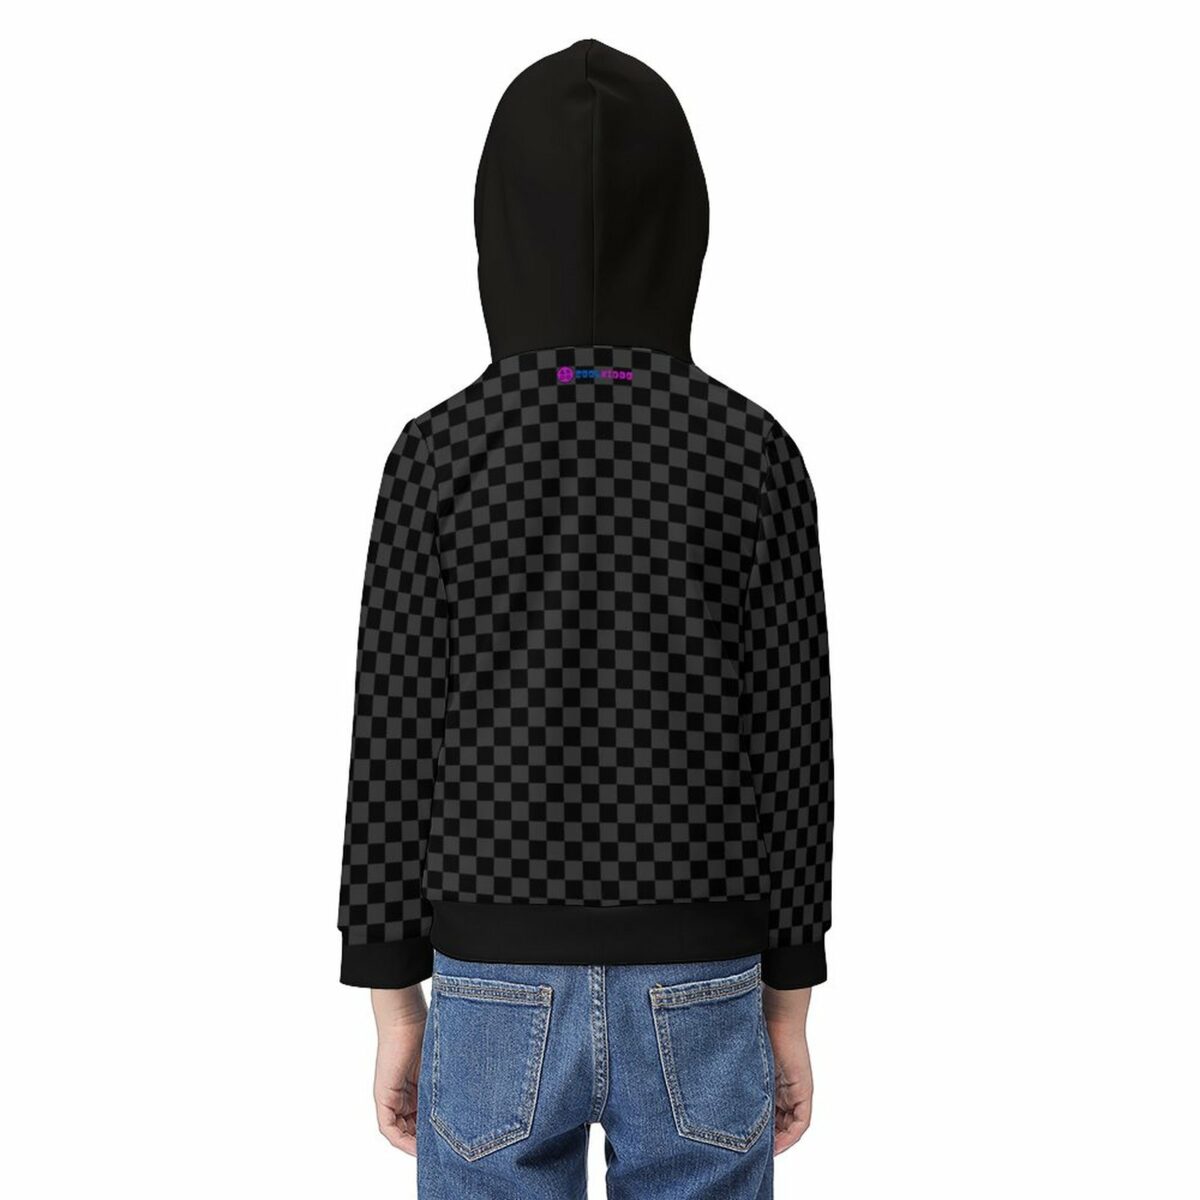 Five Nights At Freddy’s 230gsm Hoodie for Kids (All-Over Printing) Cool Kiddo 18